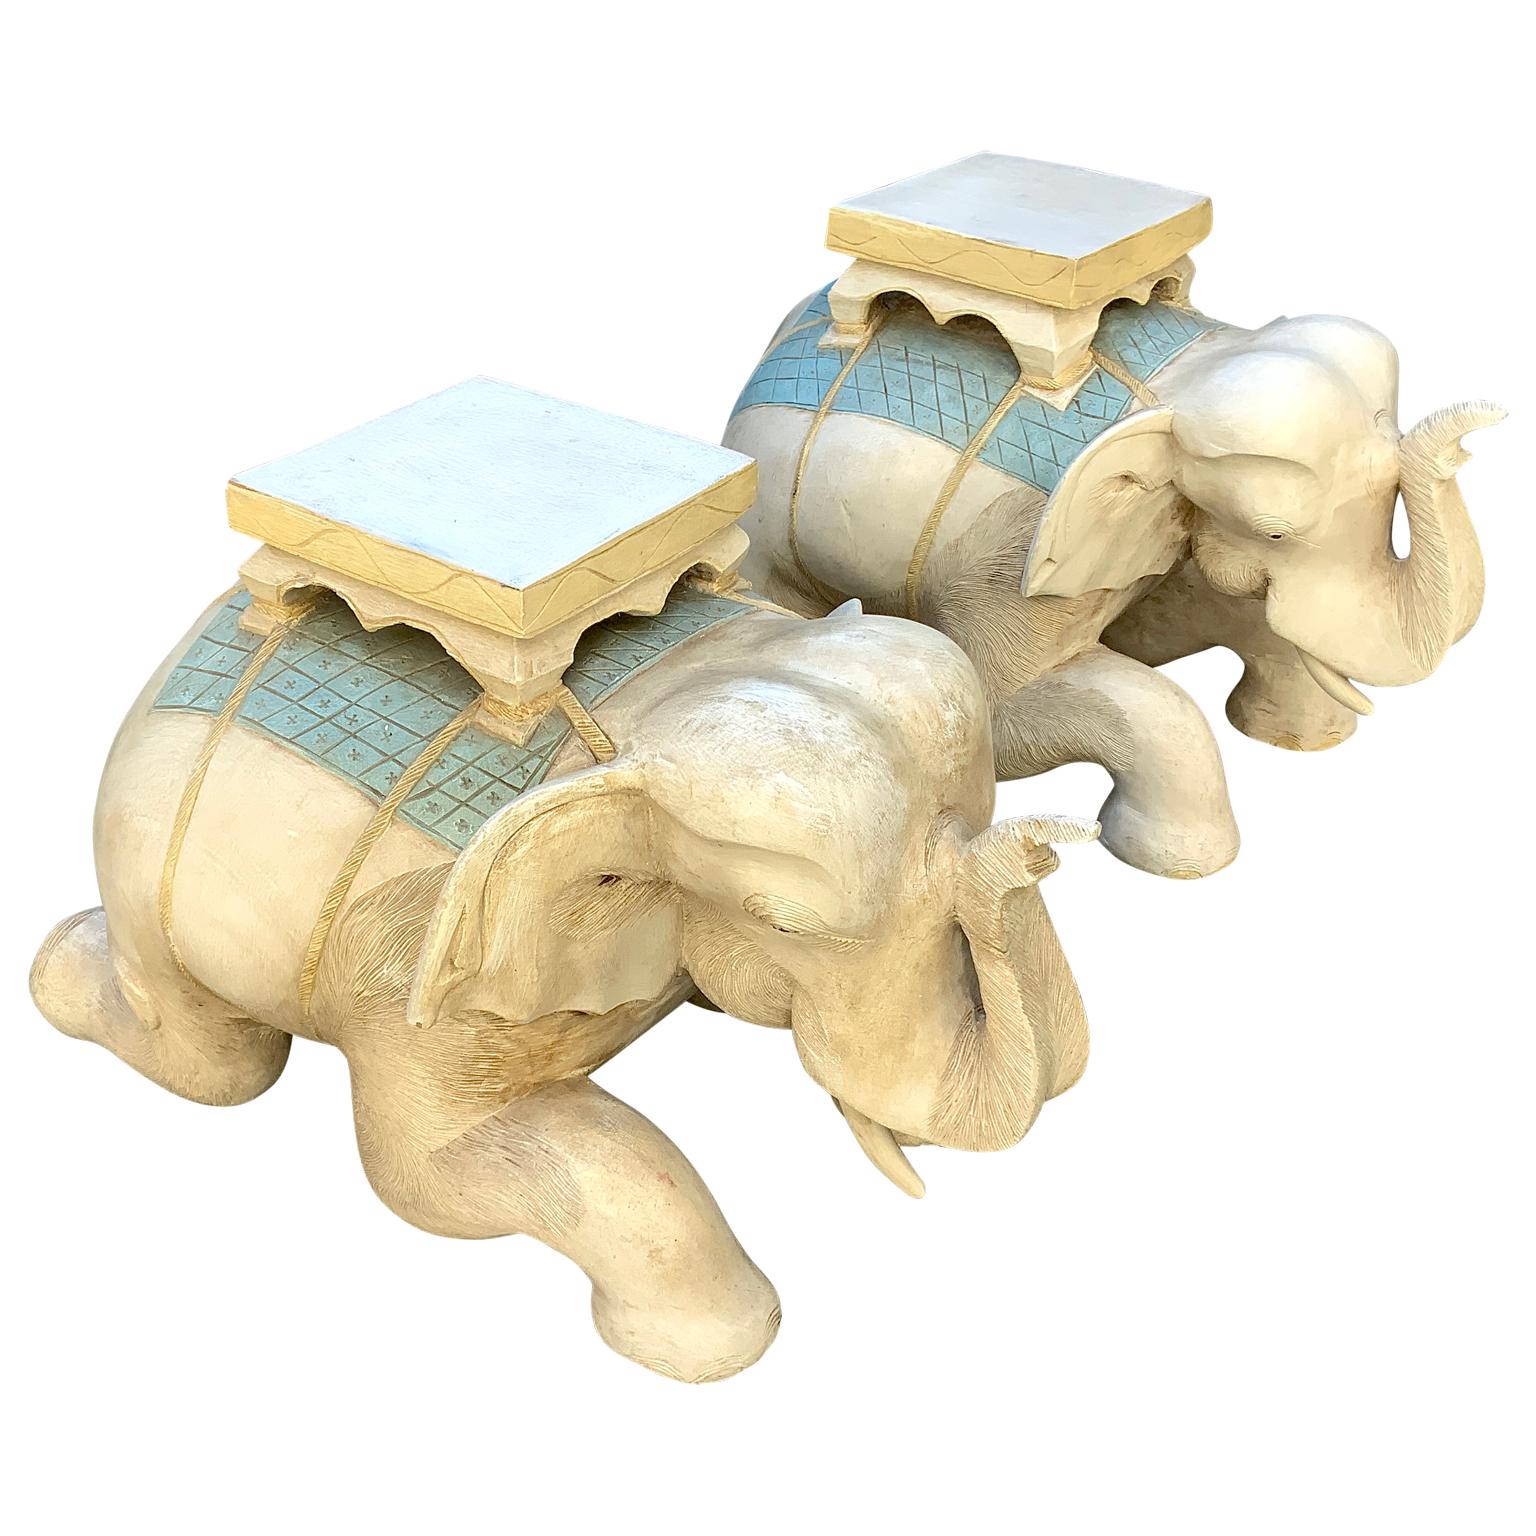 A wonderful vintage pair of solid wood hand carved elephant garden seats. Beautiful polychroming in yellow & robins egg blue. Opposing pair. Very nice detail. Heavy, solid.